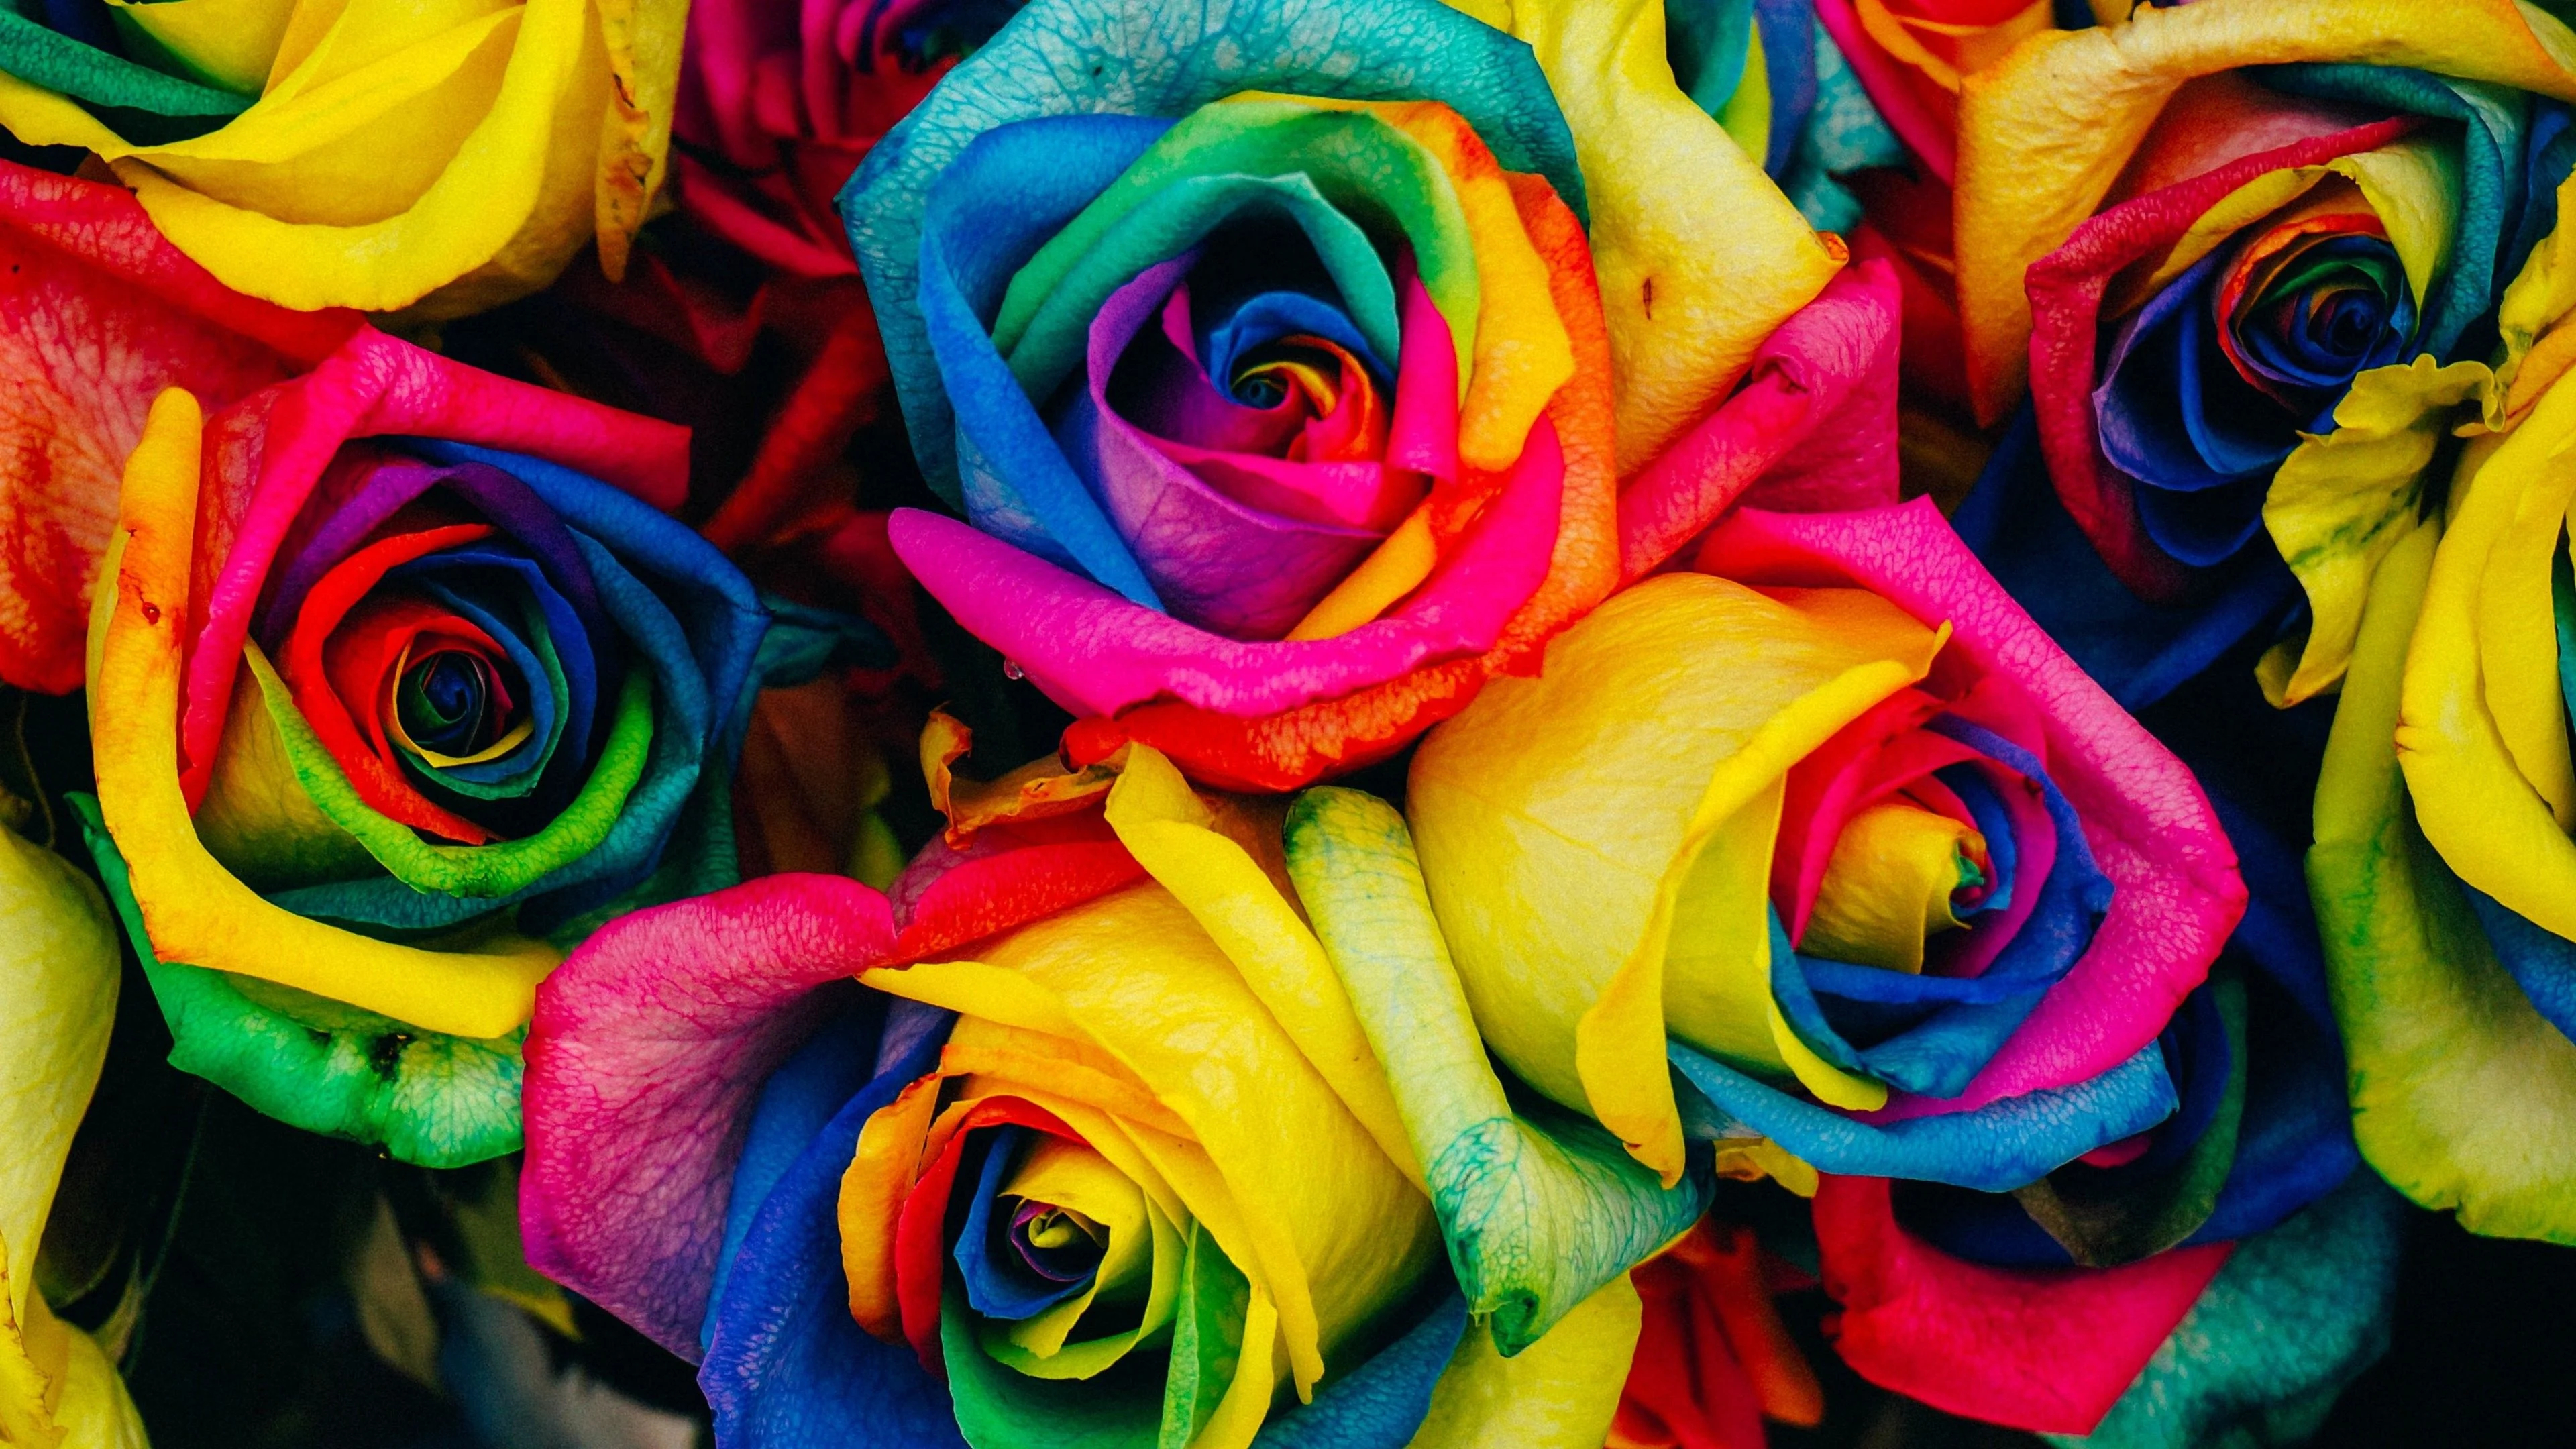 3840x2160 Colorful Roses Wallpapers Top Free Colorful Roses Backgrounds